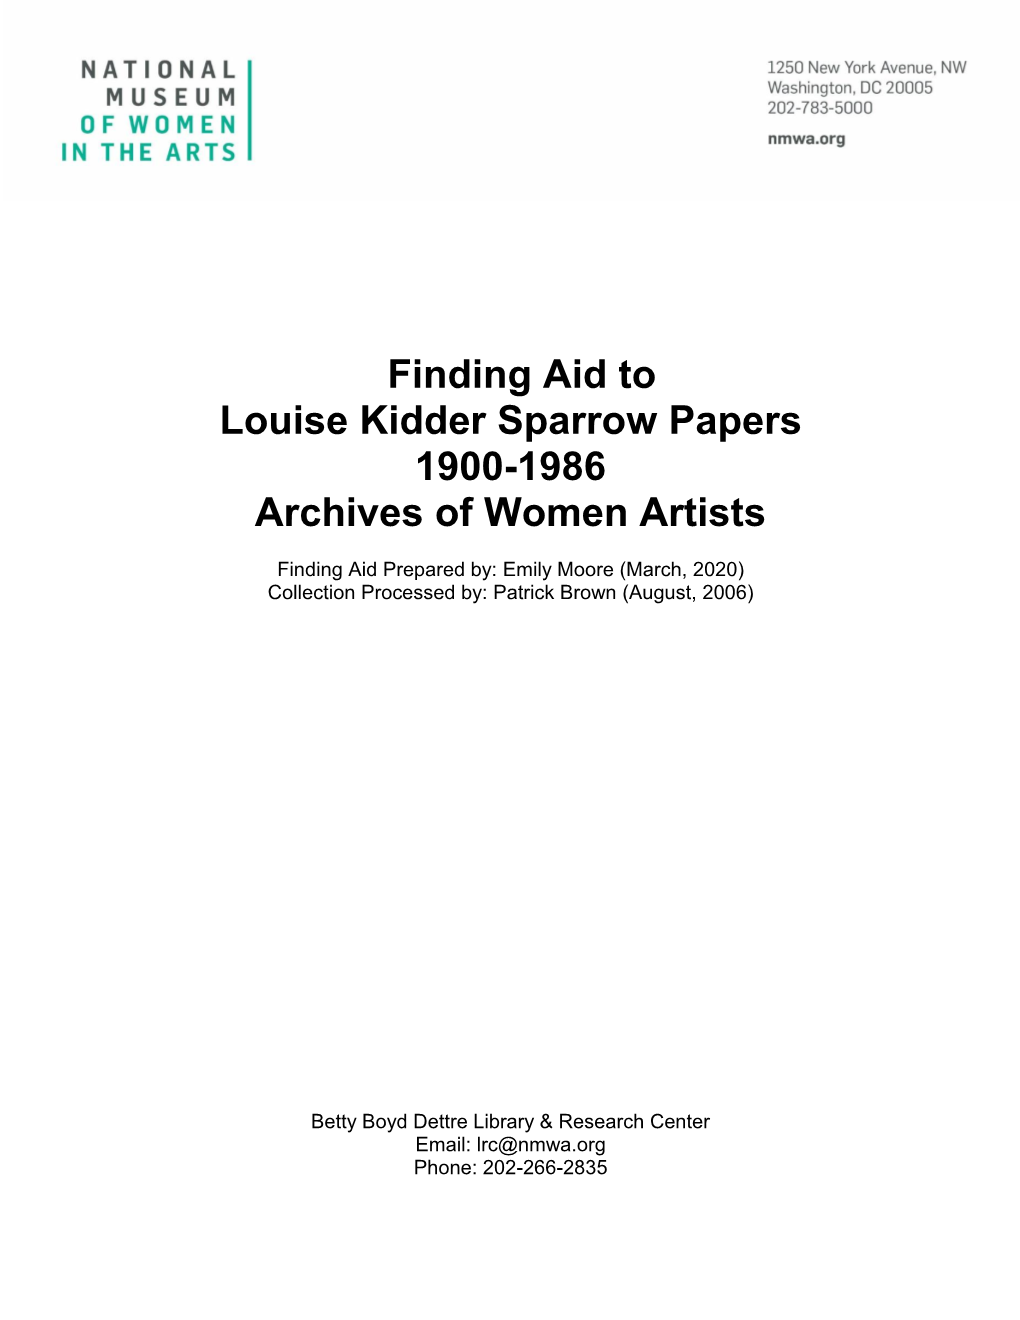 Finding Aid to Louise Kidder Sparrow Papers 1900-1986 Archives of Women Artists